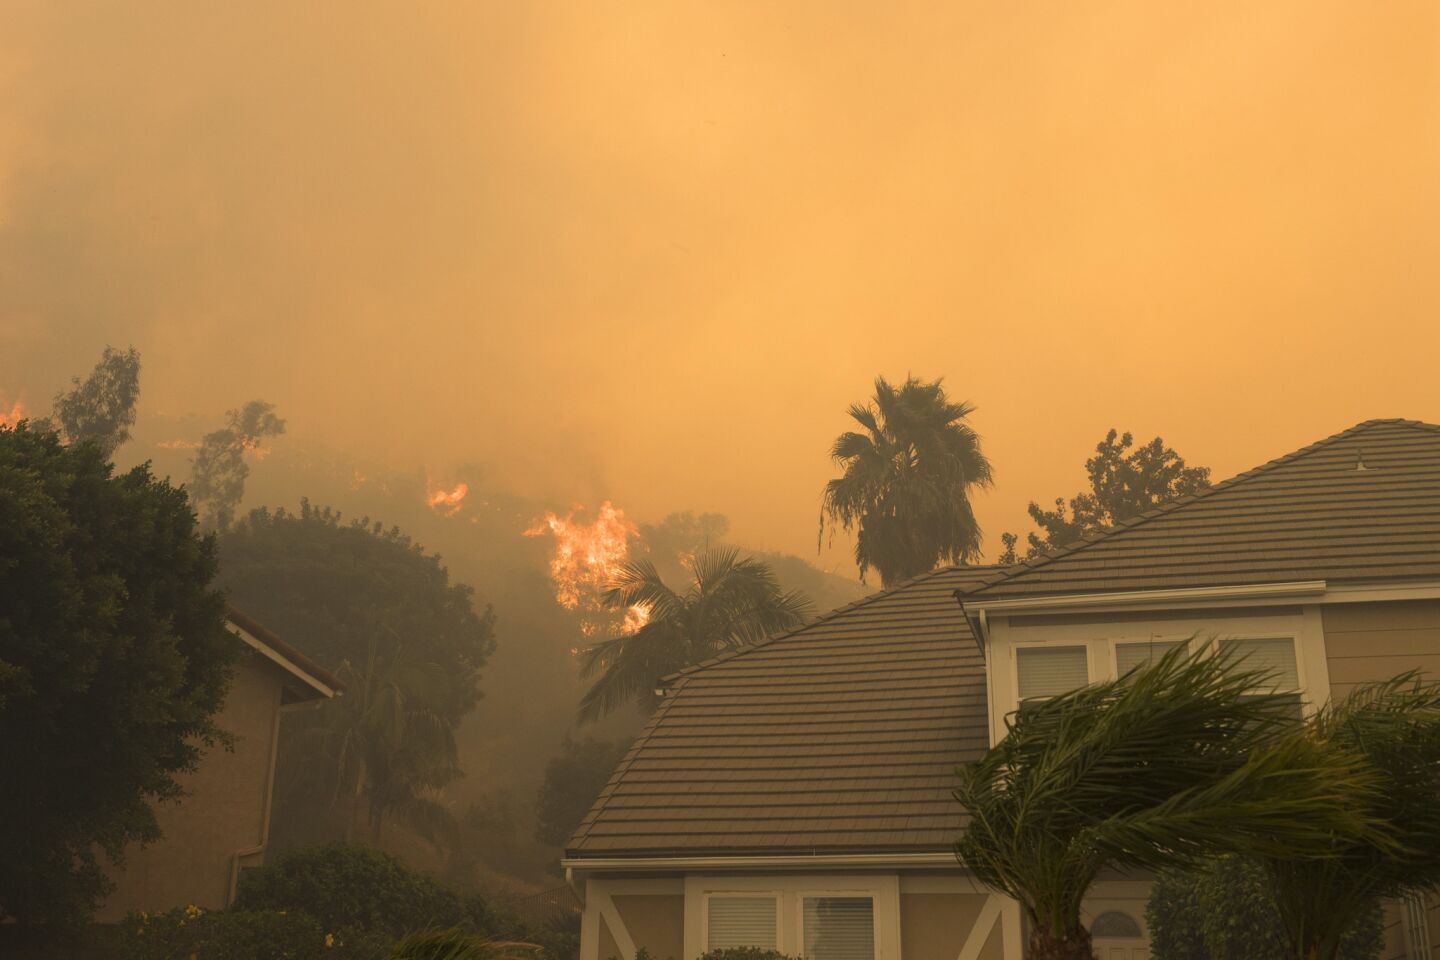 Canyon fire No. 2 in Anaheim Hills